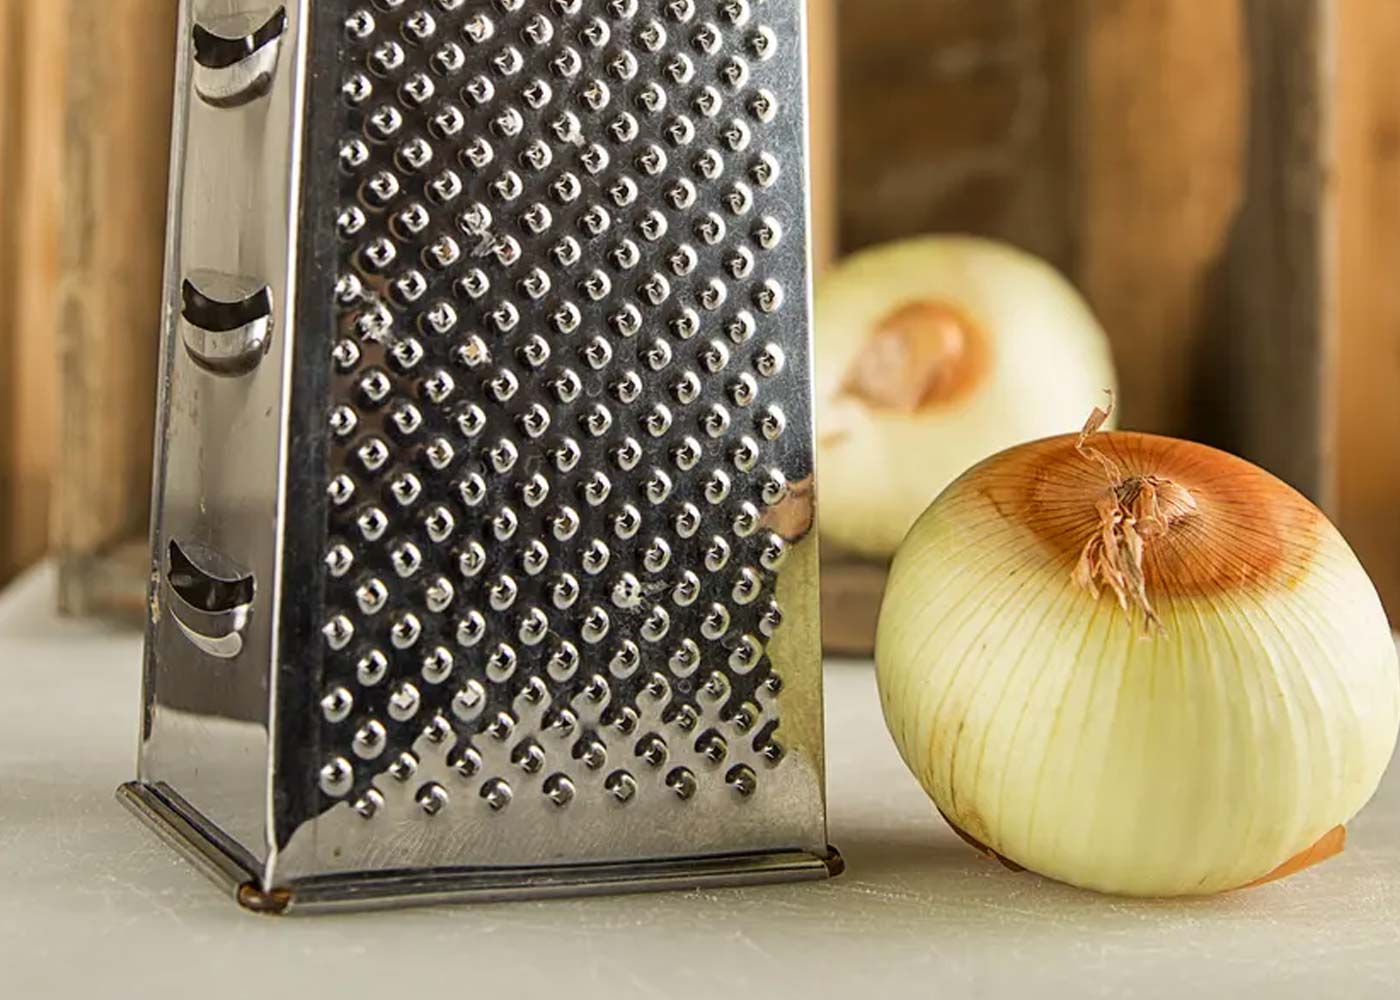 How to Grate an Onion Using a Grater